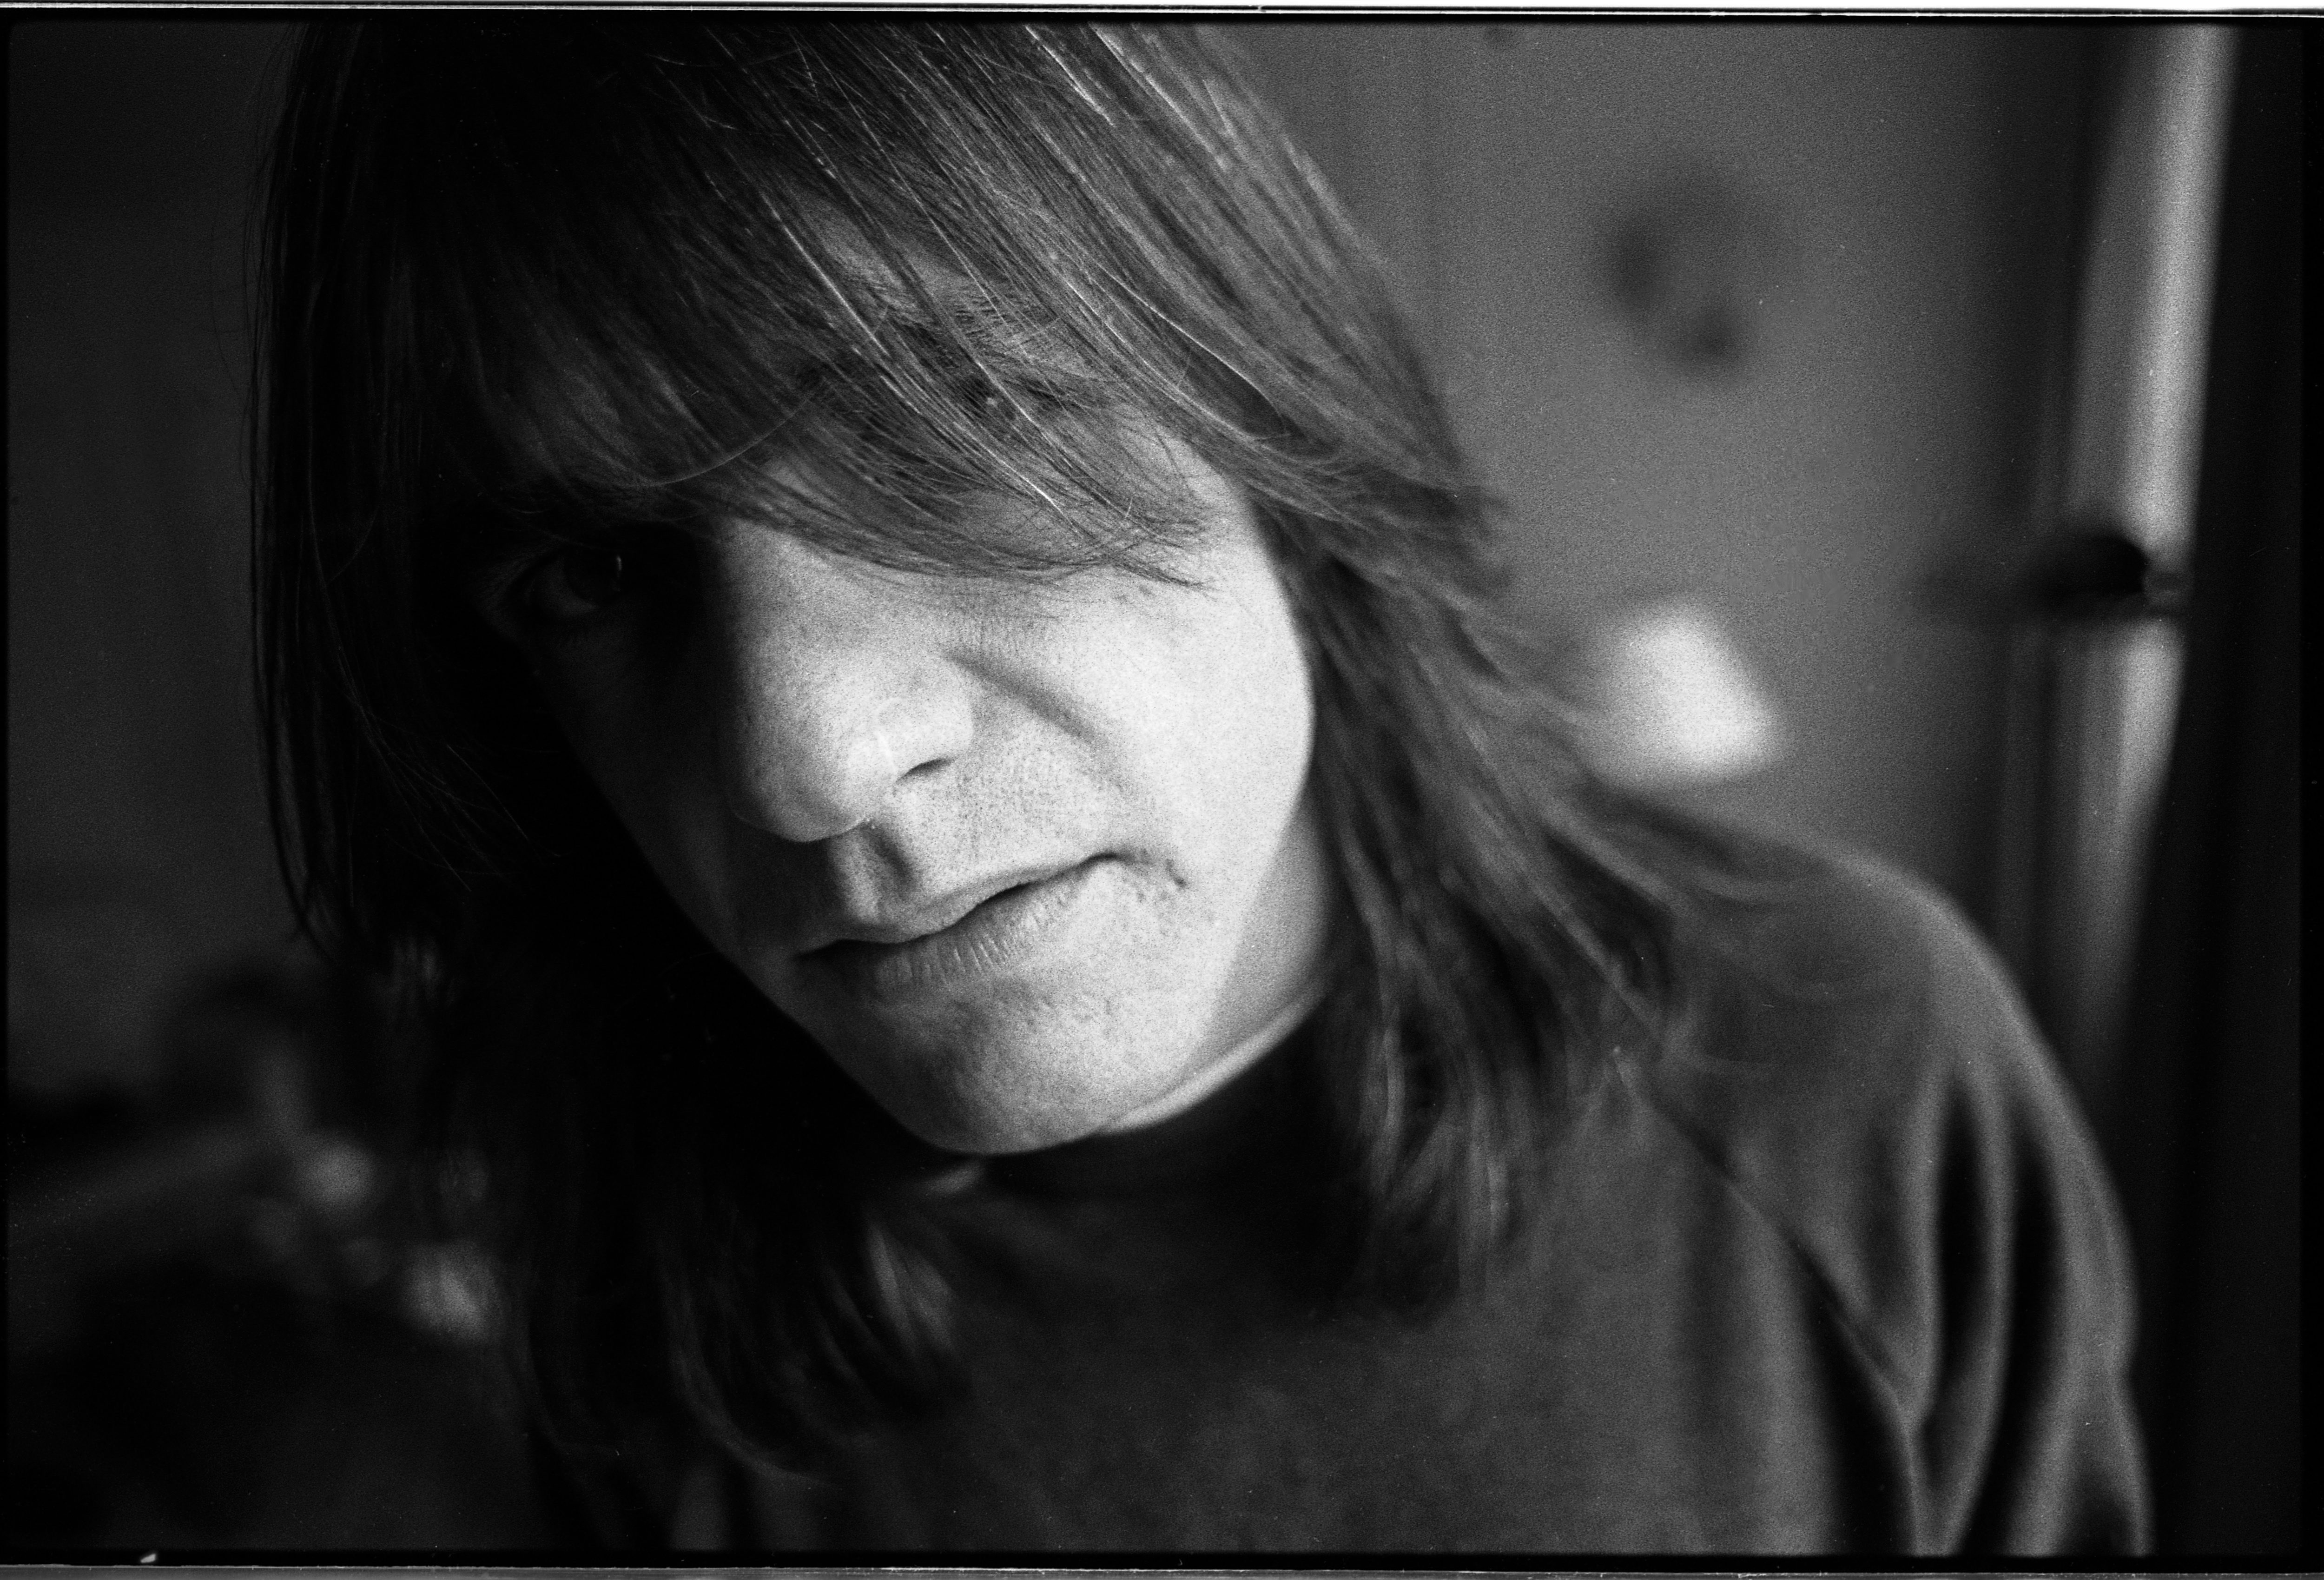 Malcolm Young of AC/DC, portrait, Germany, 1995. (Photo by Martyn Goodacre/Getty Images)